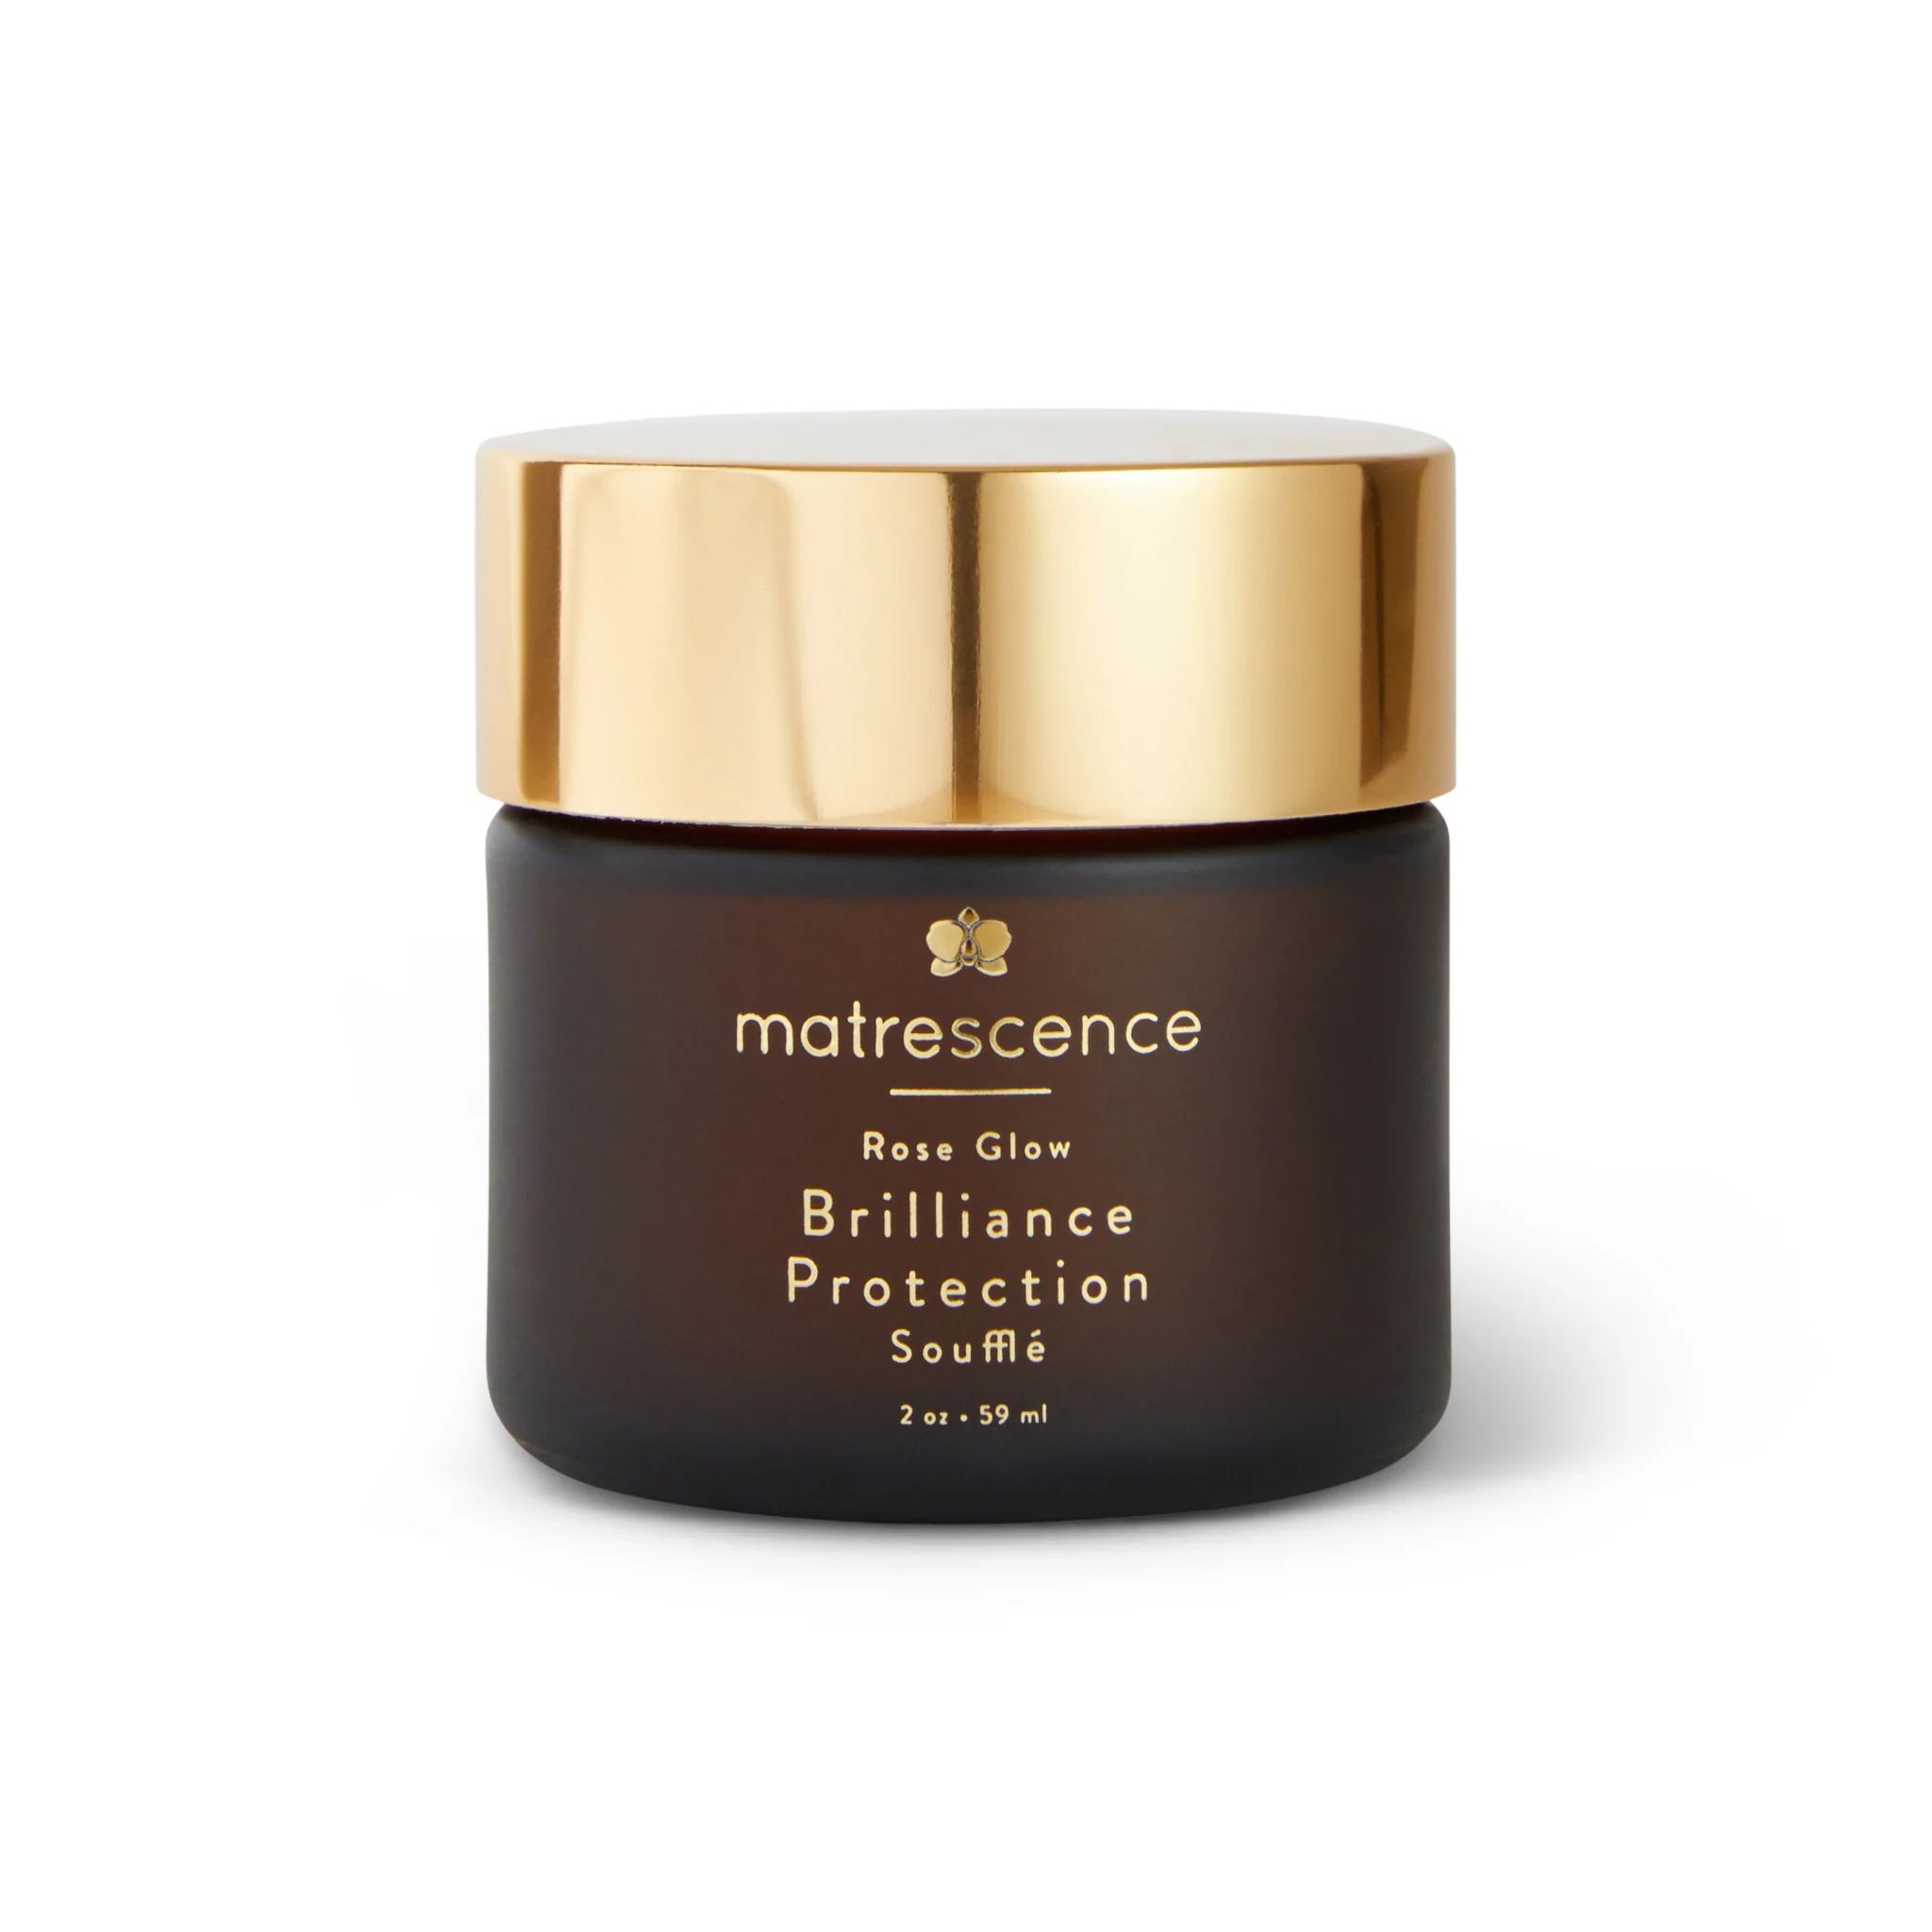 Rose Glow Brilliance Protection Soufflé | Pretty Well Beauty